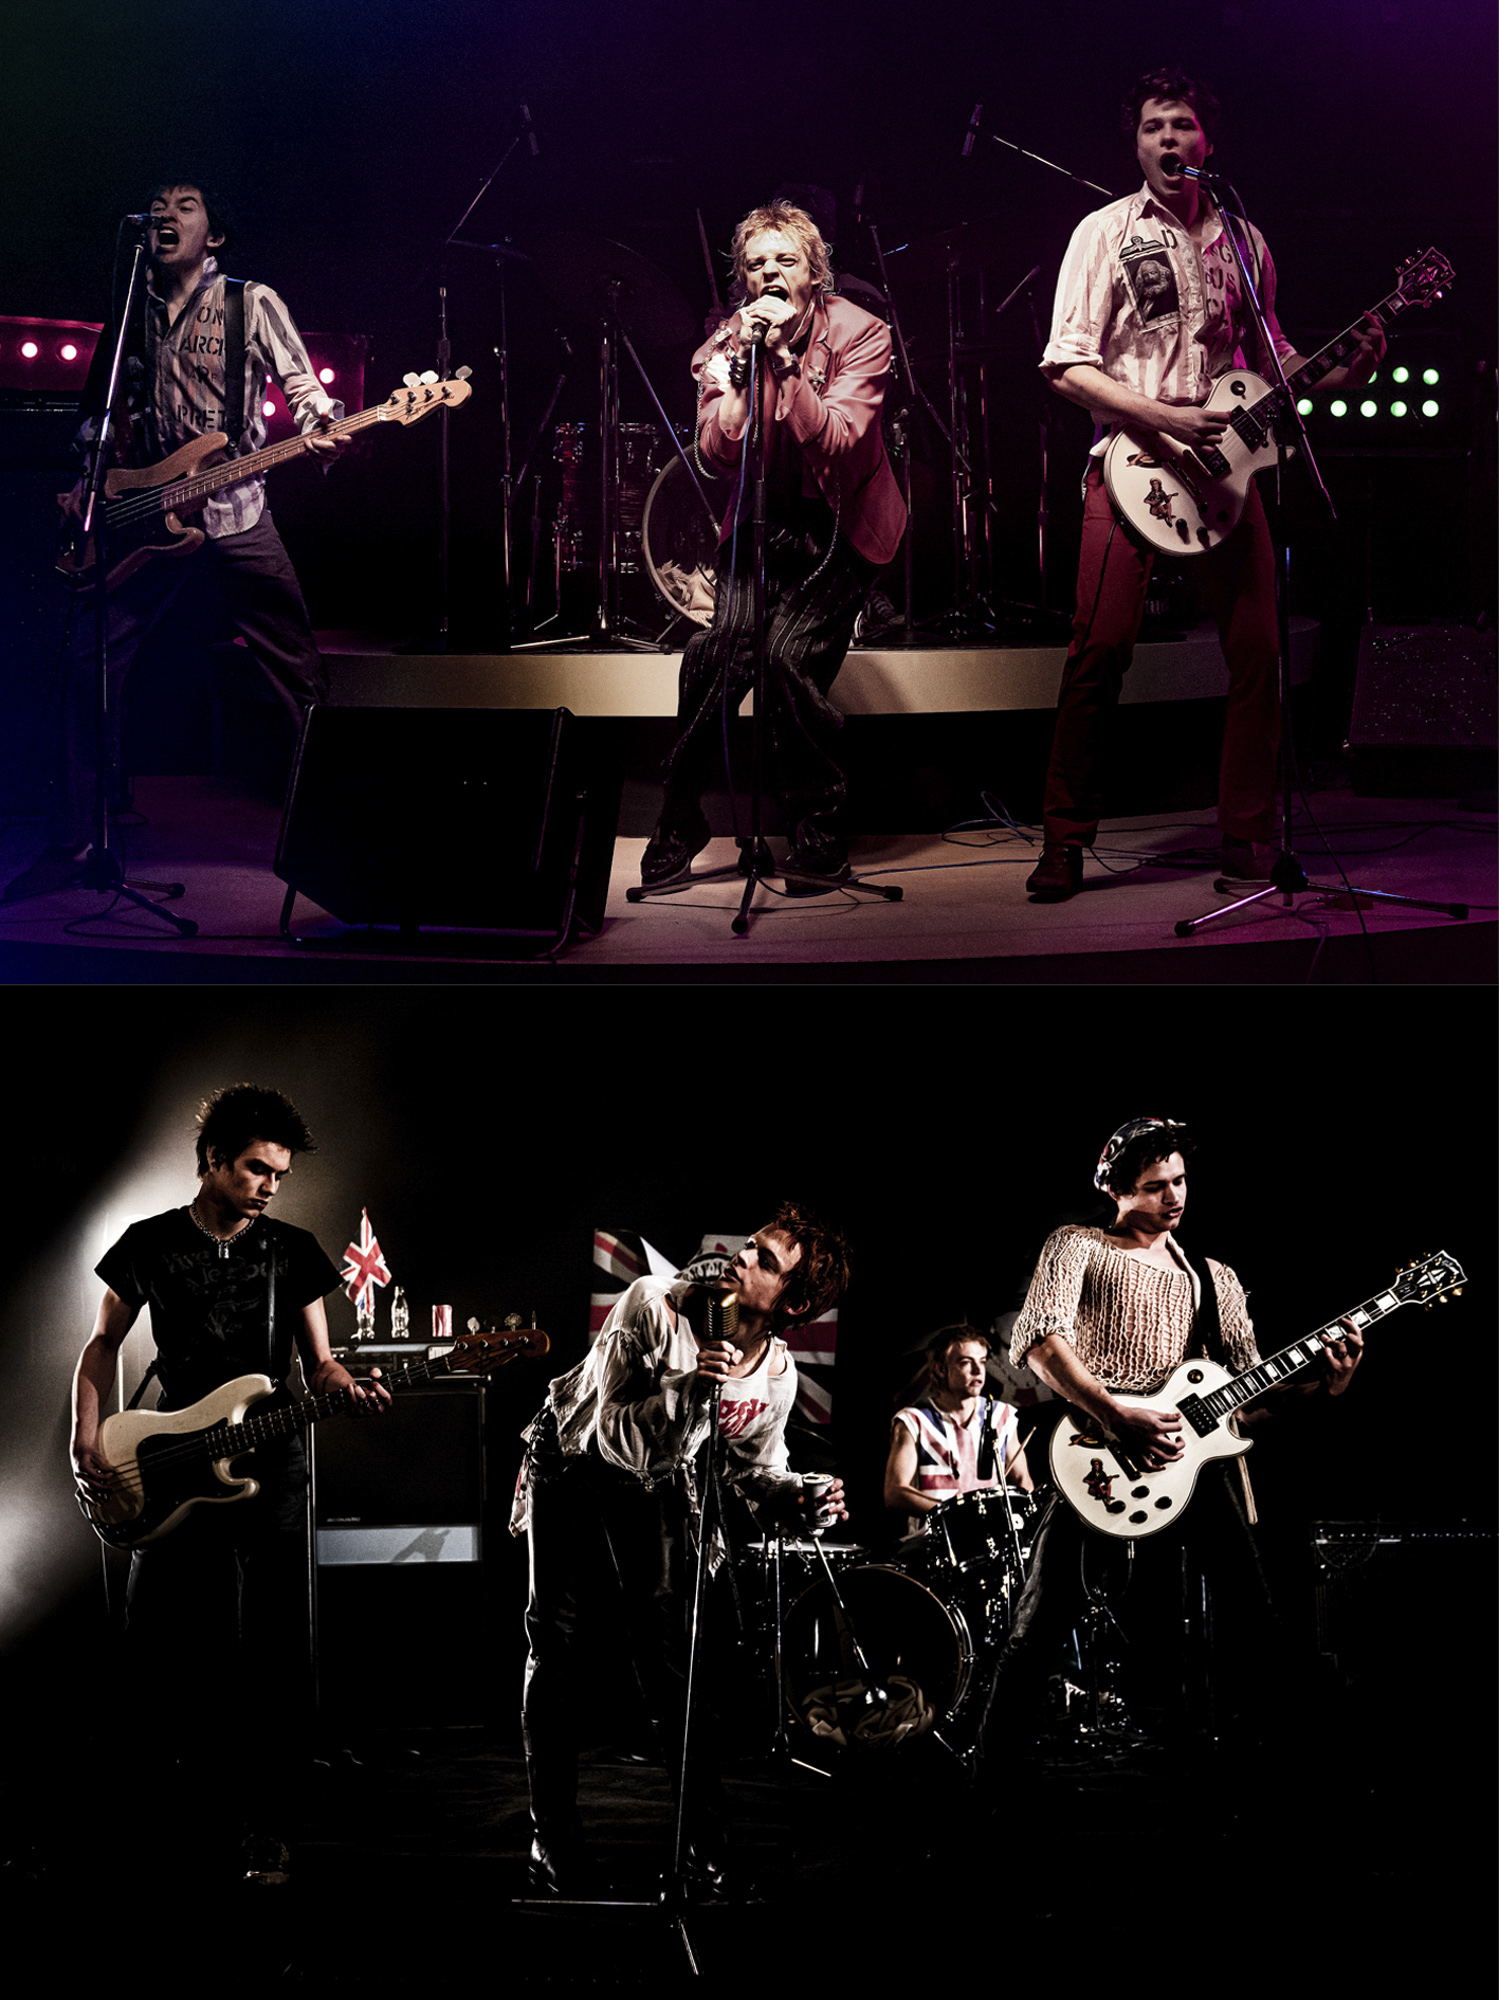 PISTOL -- Top: A first look image from Danny Boyle and FXâs Pistol. 
Left to right: Christian Lees as original bassist Glen Matlock, Anson Boon as singer John Lydon and Toby Wallace as guitarist Steve Jones.
 
Bottom: A first look image from Danny Boyle and FXâs Pistol. 
Left to right: Louis Partridge as bassist Sid Vicious, Anson Boon as singer John Lydon, Jacob Slater as drummer Paul Cook and Toby Wallace as guitarist Steve Jones.  CR: Miya Mizuno/FX

Image is to be used as presented and not cropped or edited to feature a single band image